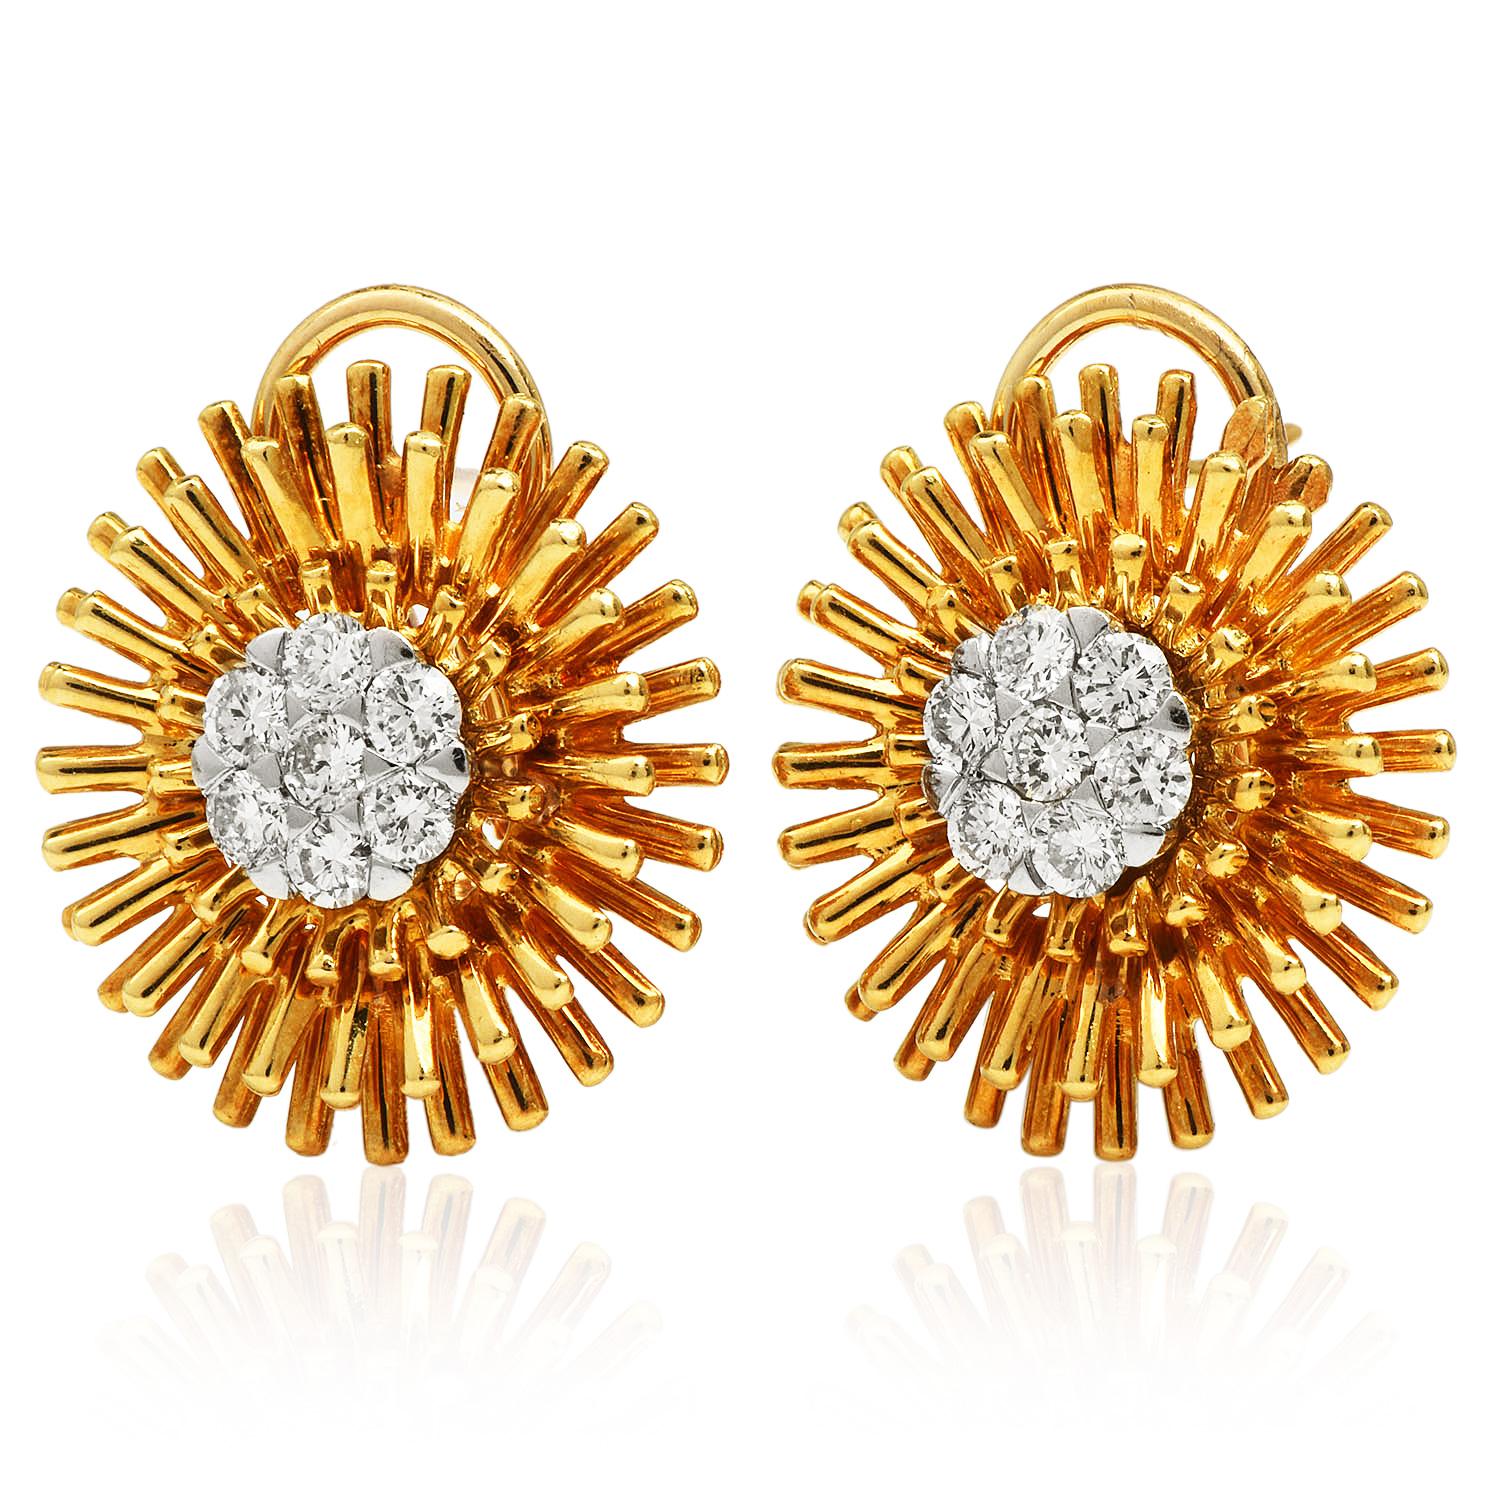  These Stylish 18K Yellow Gold Pave Diamond Earrings were

 inspired by sun. 

These Bright hot yellow sun diamond Pave sets mounted in yellow gold adorn the center of the earrings.  They weigh appx. 0.85 carats in total, the diamonds are G-H color